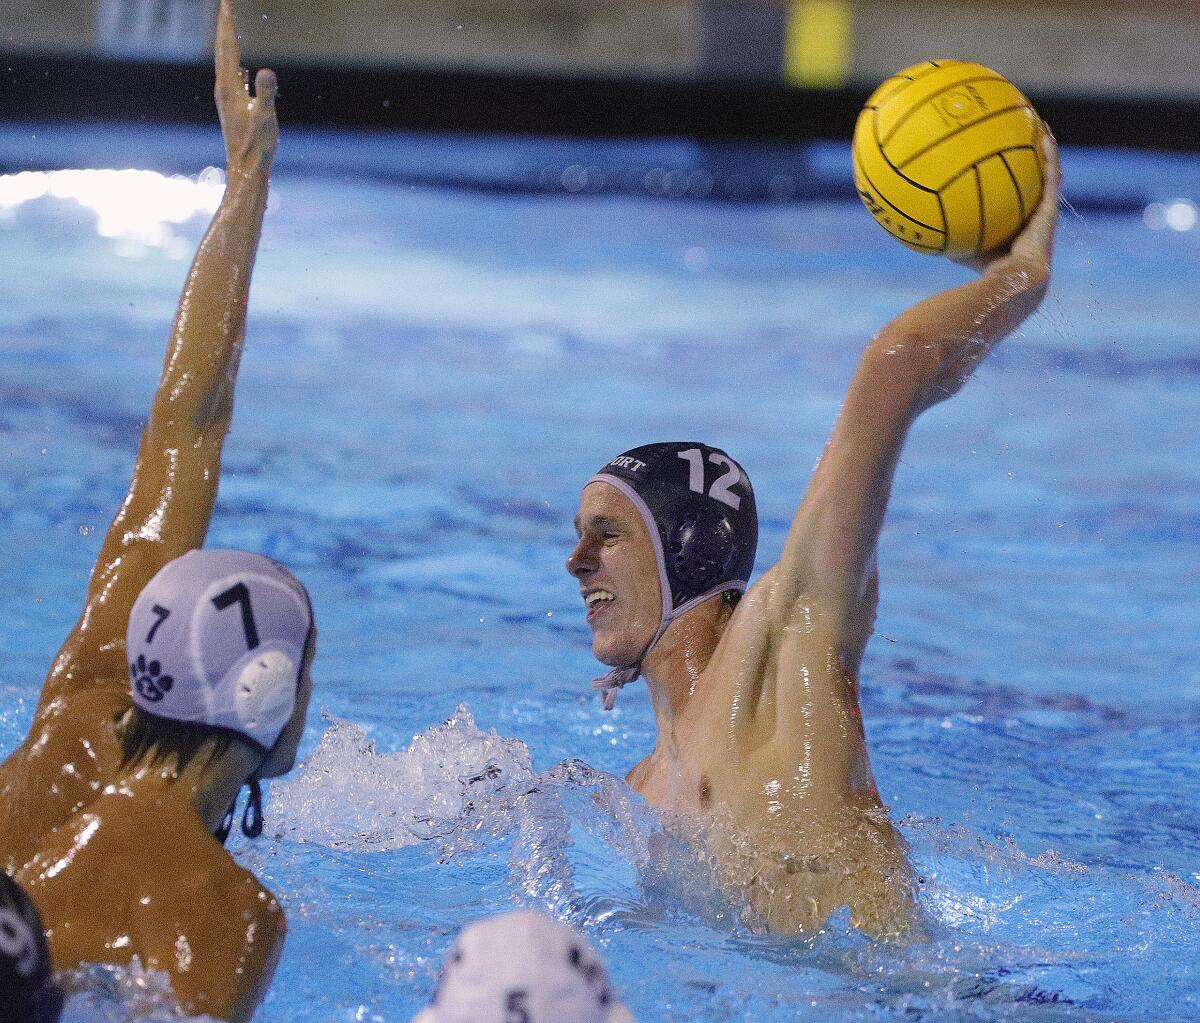 Newport Harbor's Tommy Kennedy shoots and scores against Loyola in the second half of the CIF Southern Section Division 1 semifinal playoff match at Woollett Aquatics Center in Irvine on Wednesday.